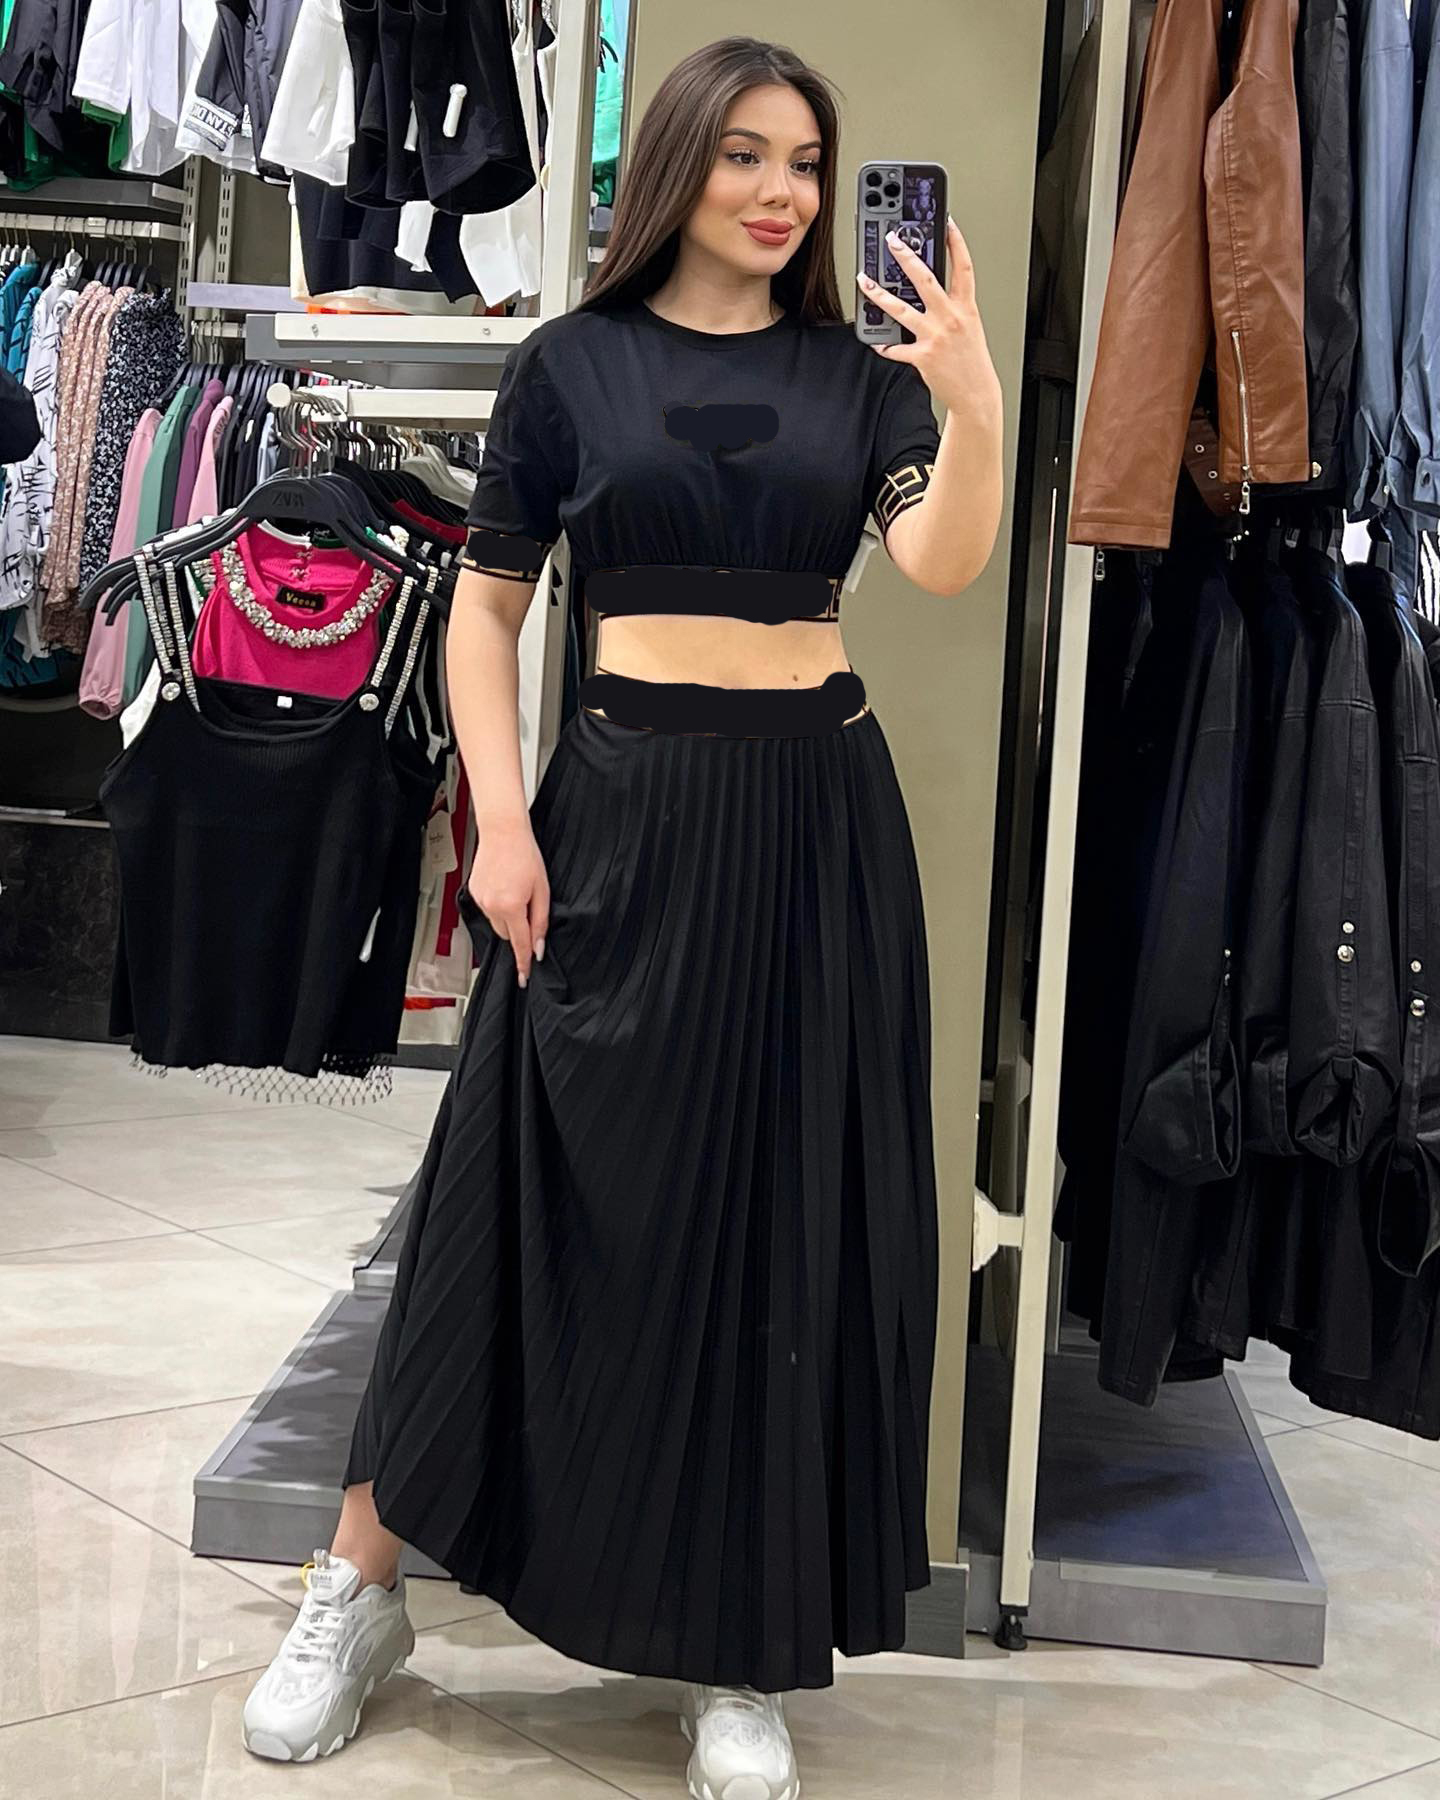 

Women's Skims Two Piece Bodycon Dress Short Sets Juicy Tracksuits Skirt Women Two Peice New In Matching Set Casual Festival Outfits Luxury Designer Clothing, Black